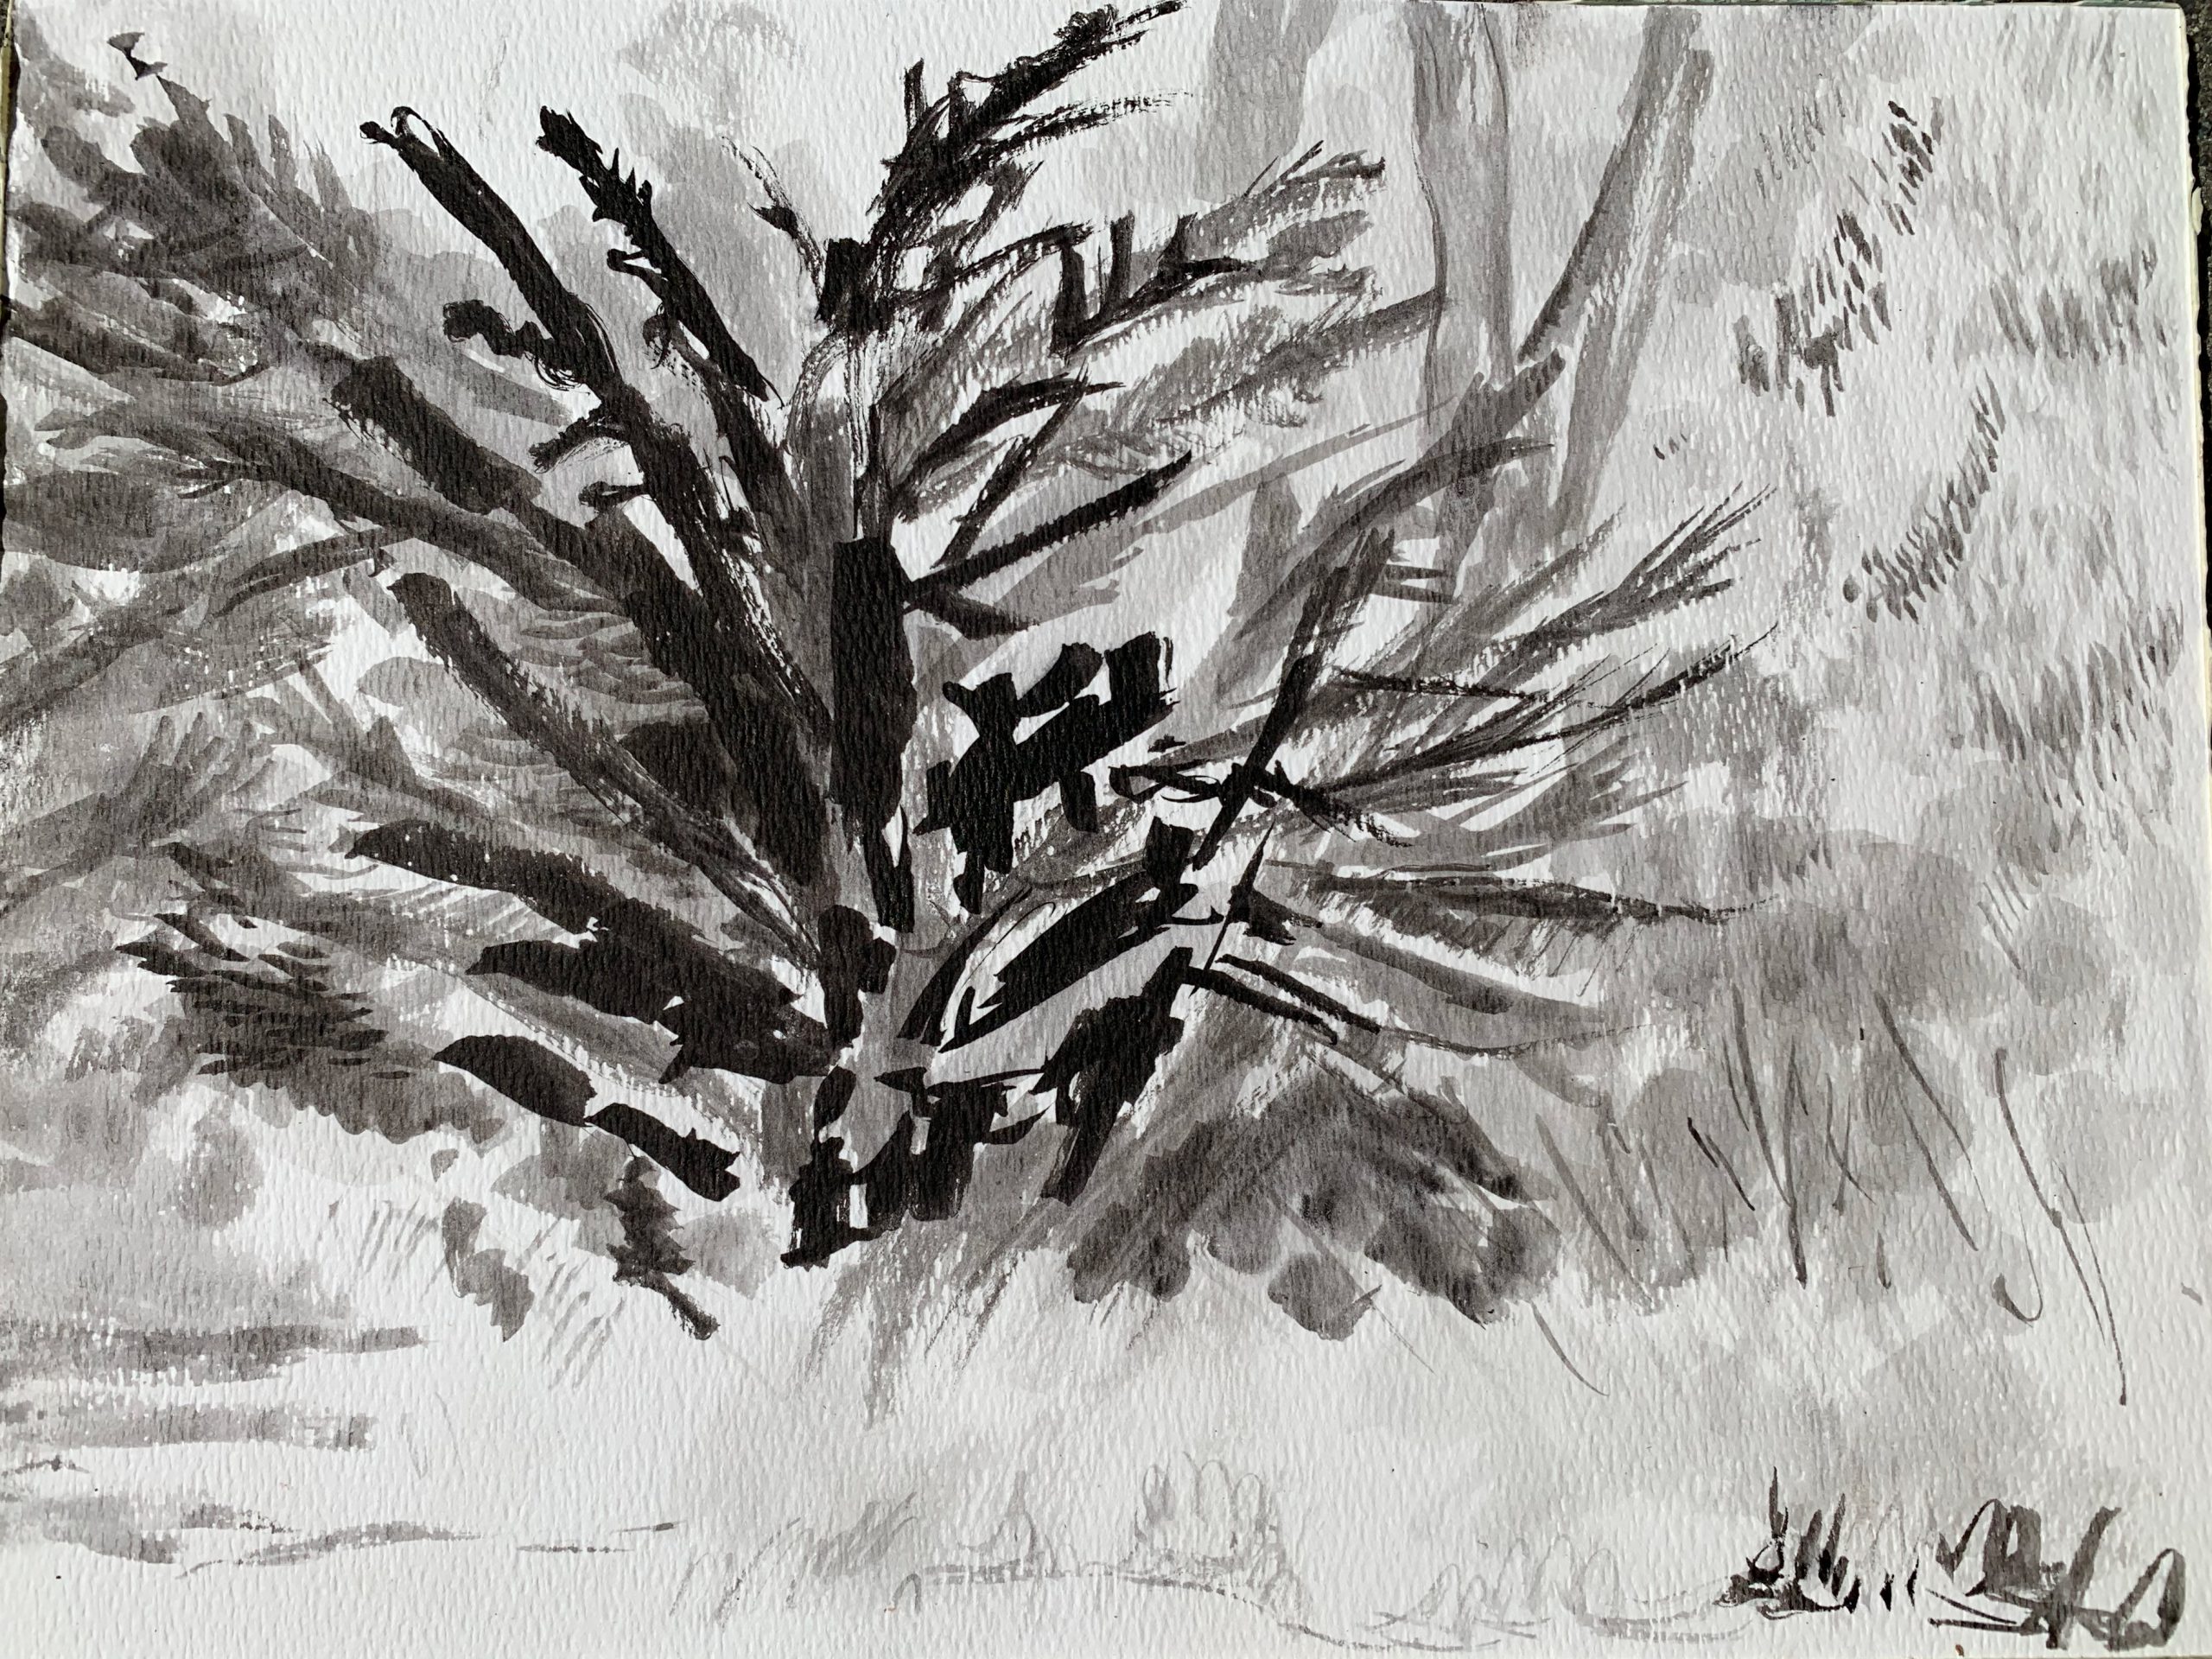 Ink wash painting of cypress tree in lighthouse field on cold press watercolor paper by artist Julia van der Wyk